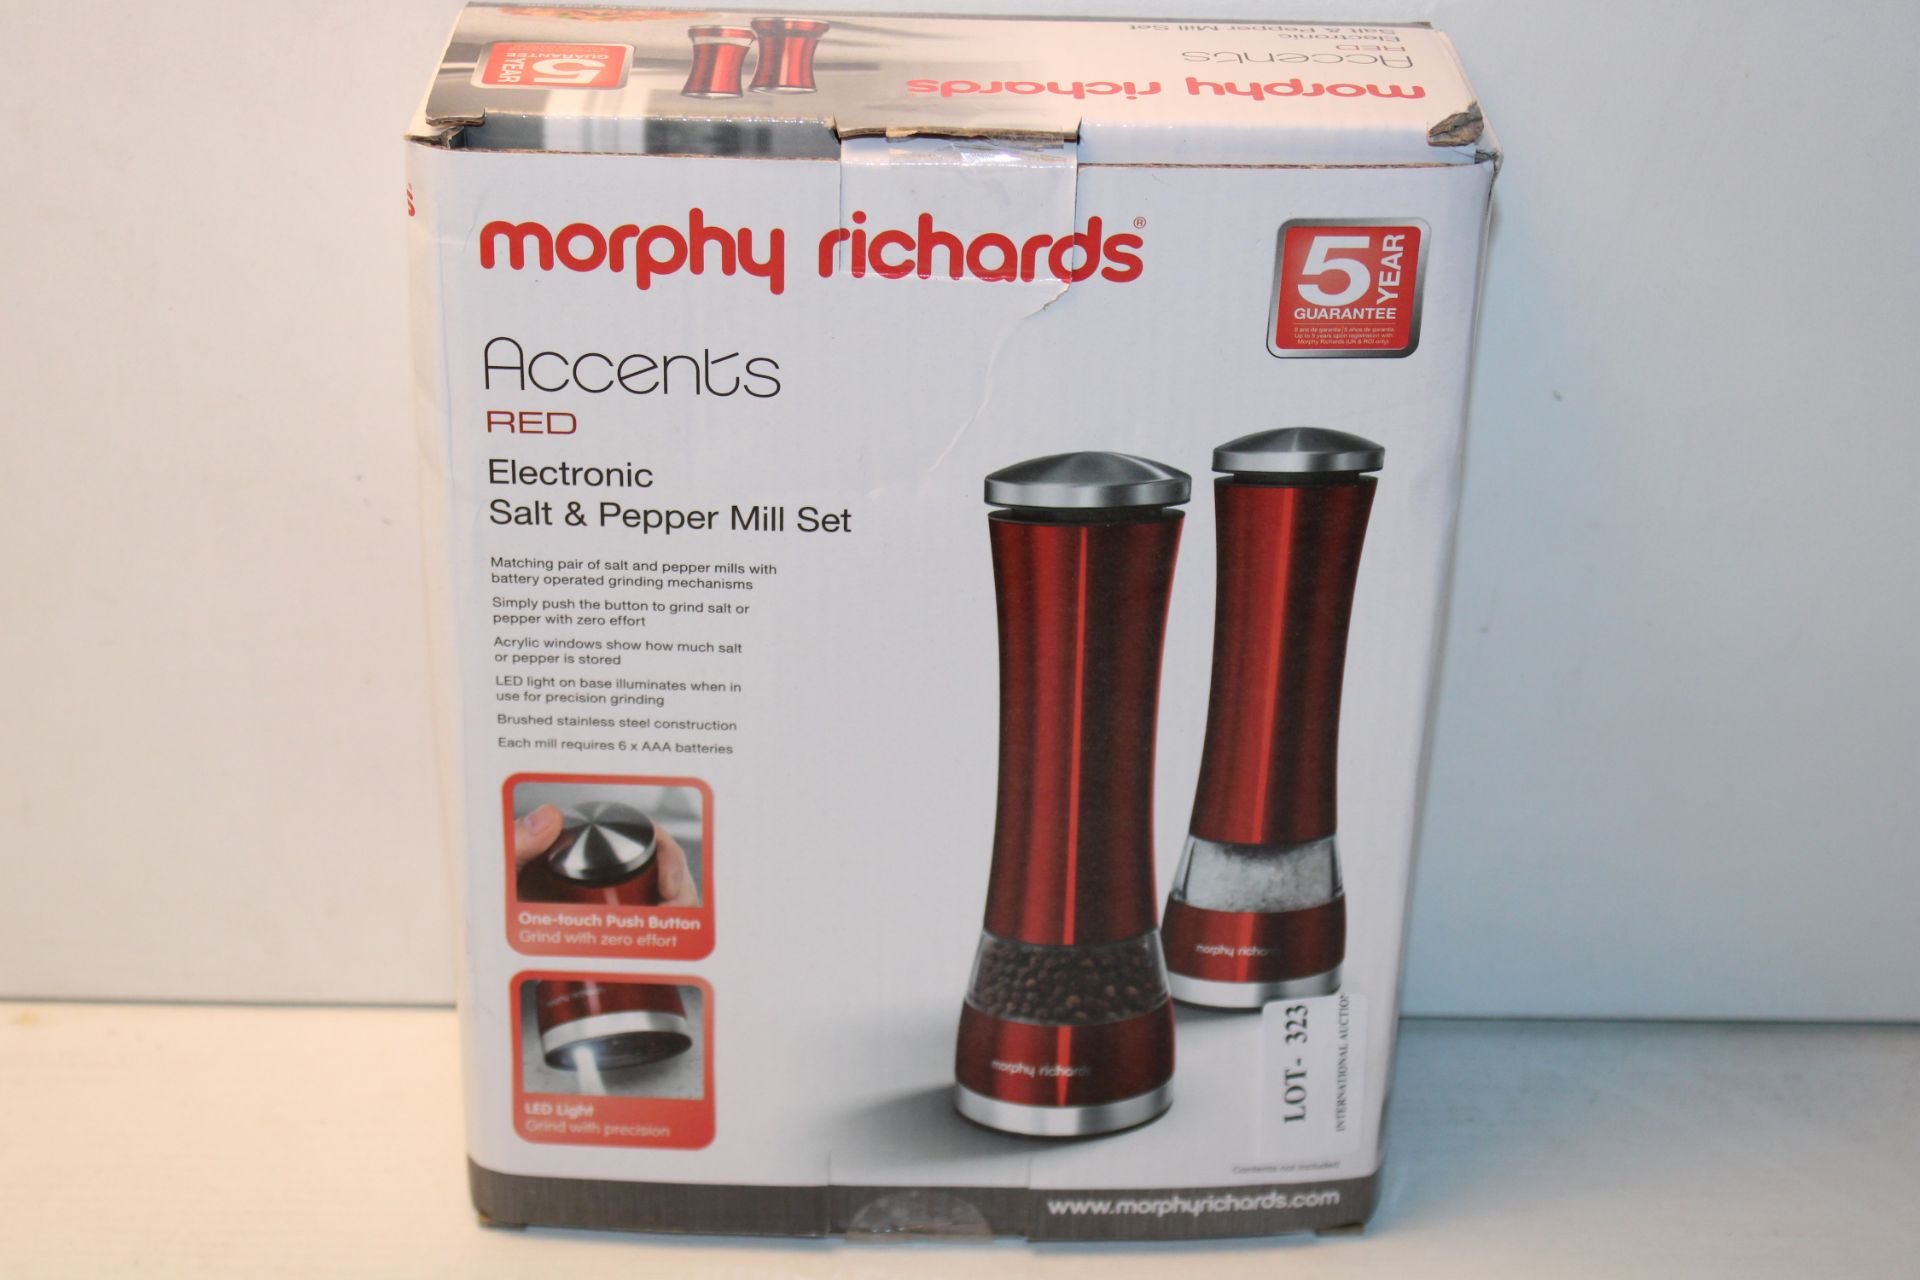 BOXED MORPHY RICHARDS ACCENTS RED ELECTRONIC SALT & PEPPER MILL SET RRP £29.99Condition